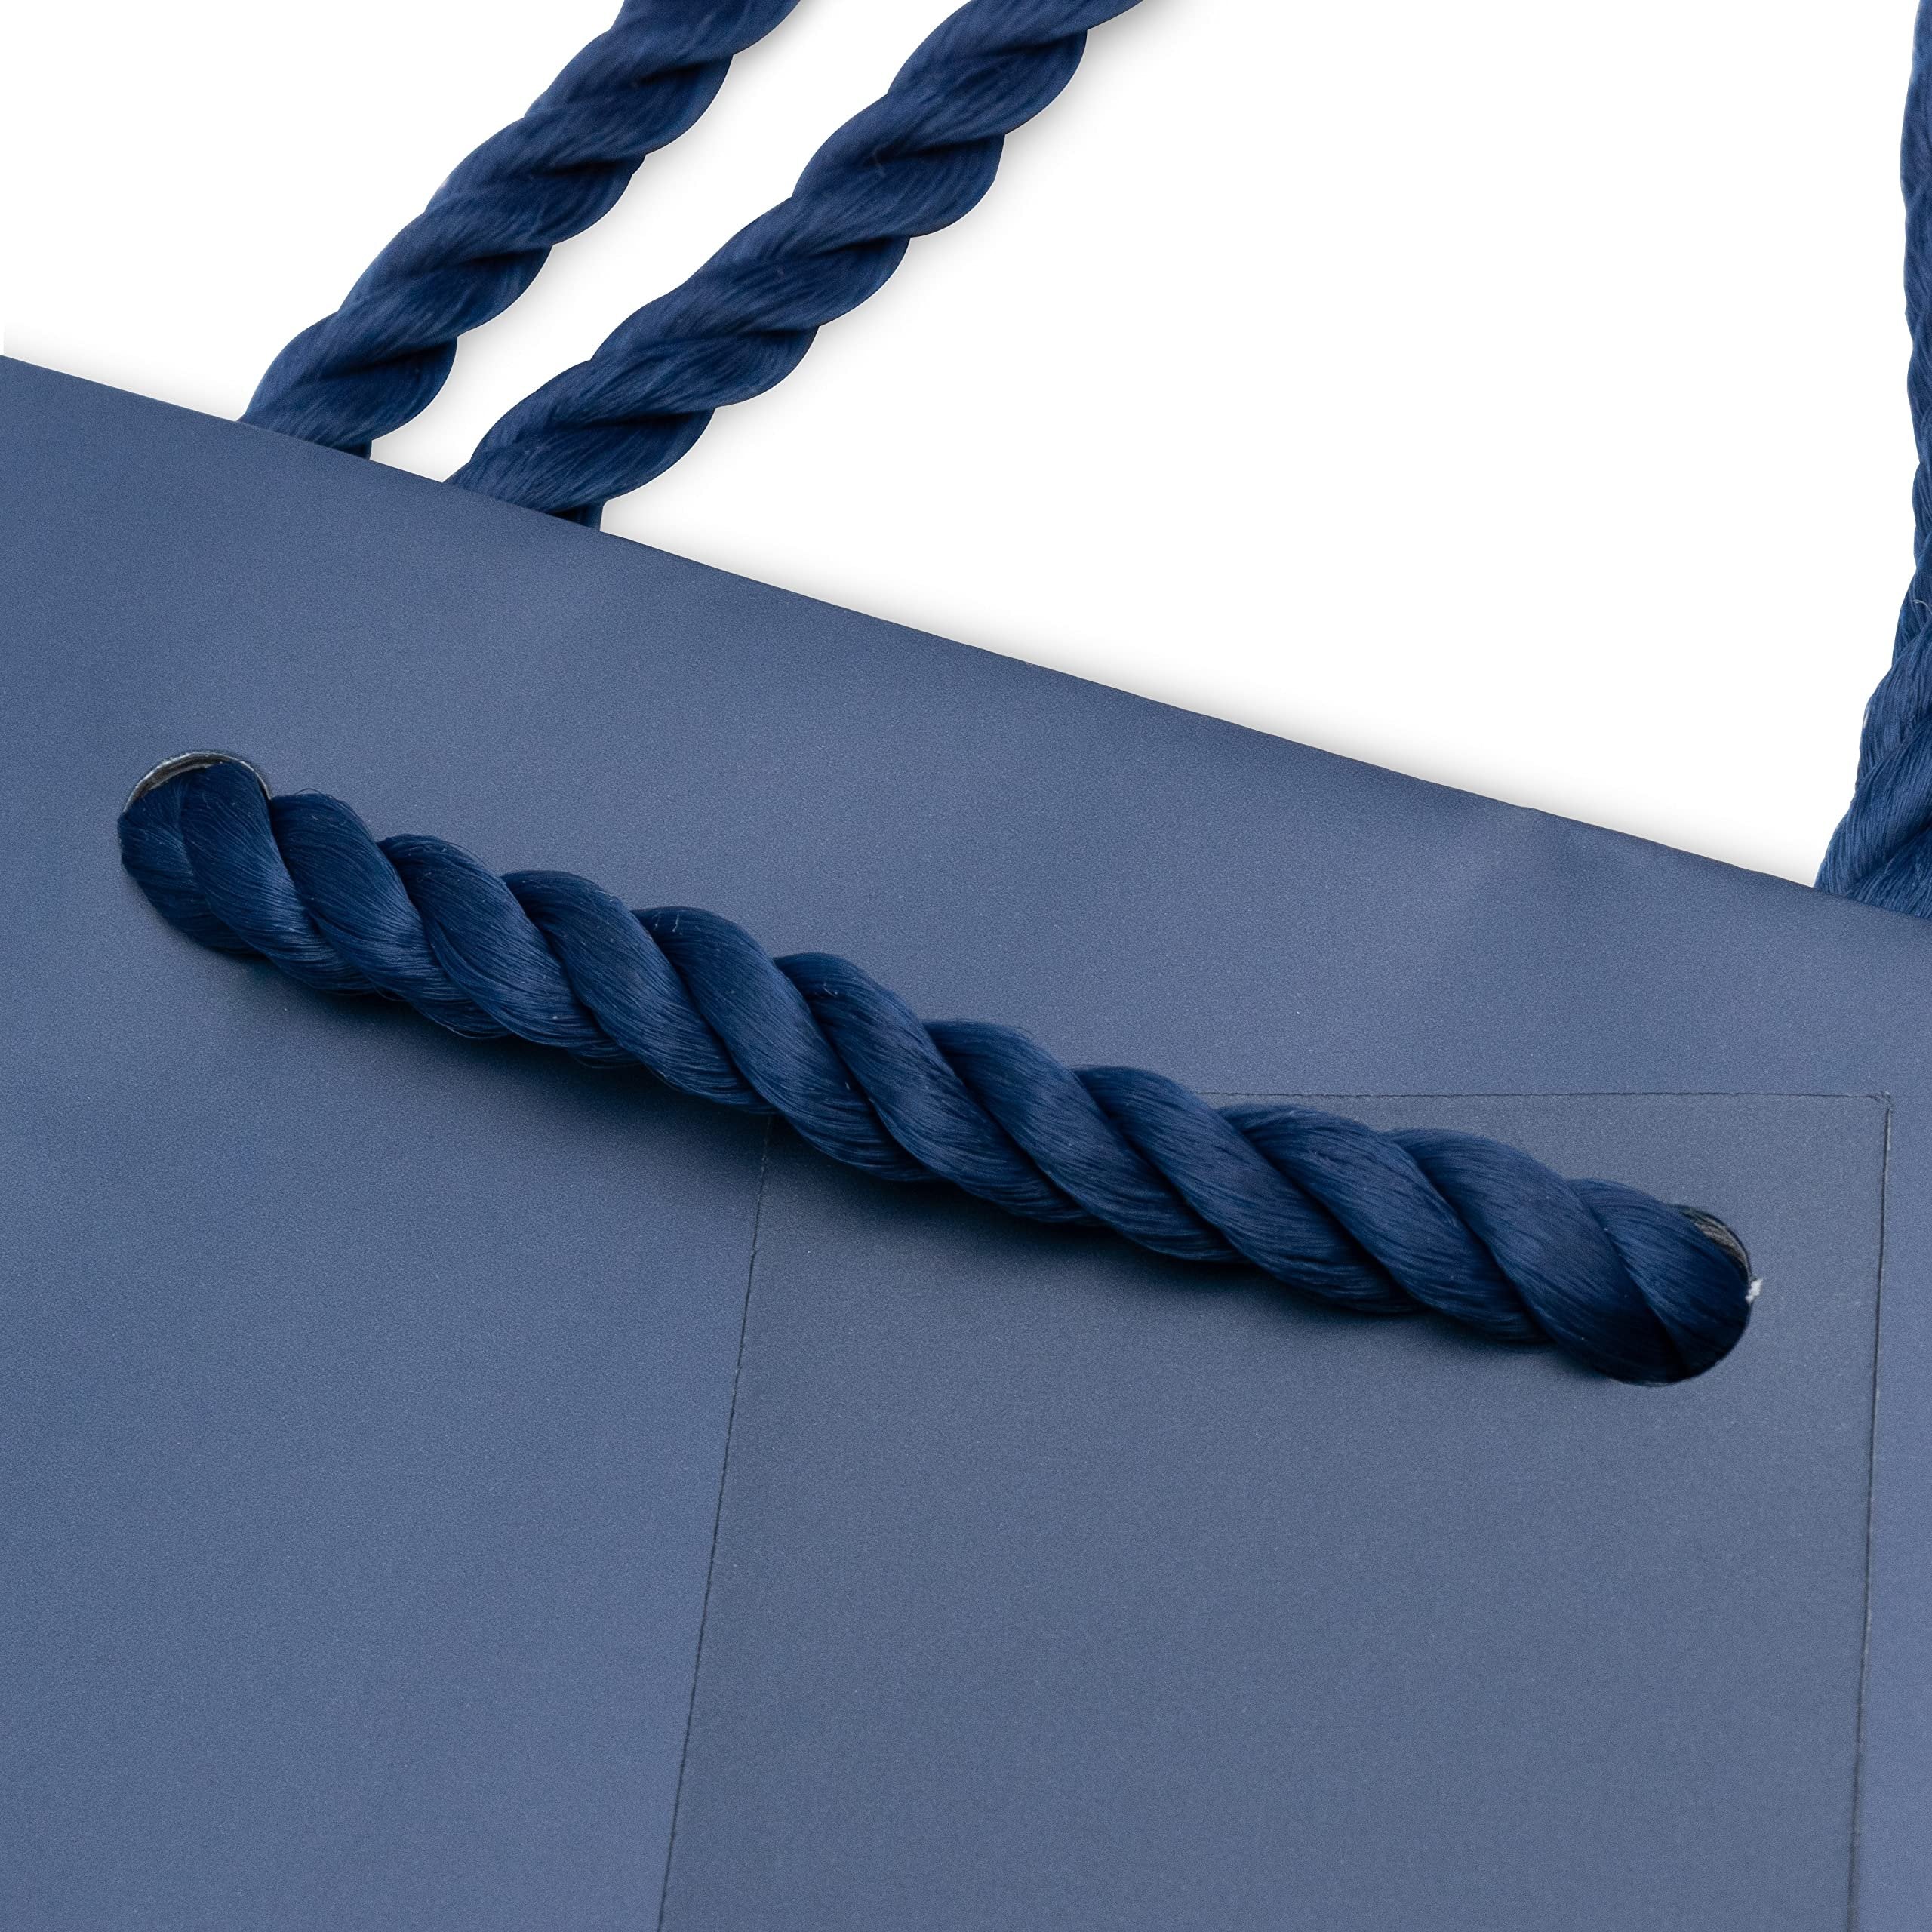 Blue Gift Bags - 12 Pack Medium Navy Paper Gift Bags with Rope Handles, Designer Solid Color Paper Gift Wrap Bags for Birthdays, Parties, Events, Bulk Favor Bags, Weddings or Any Occasion - 7.5x9x3.5